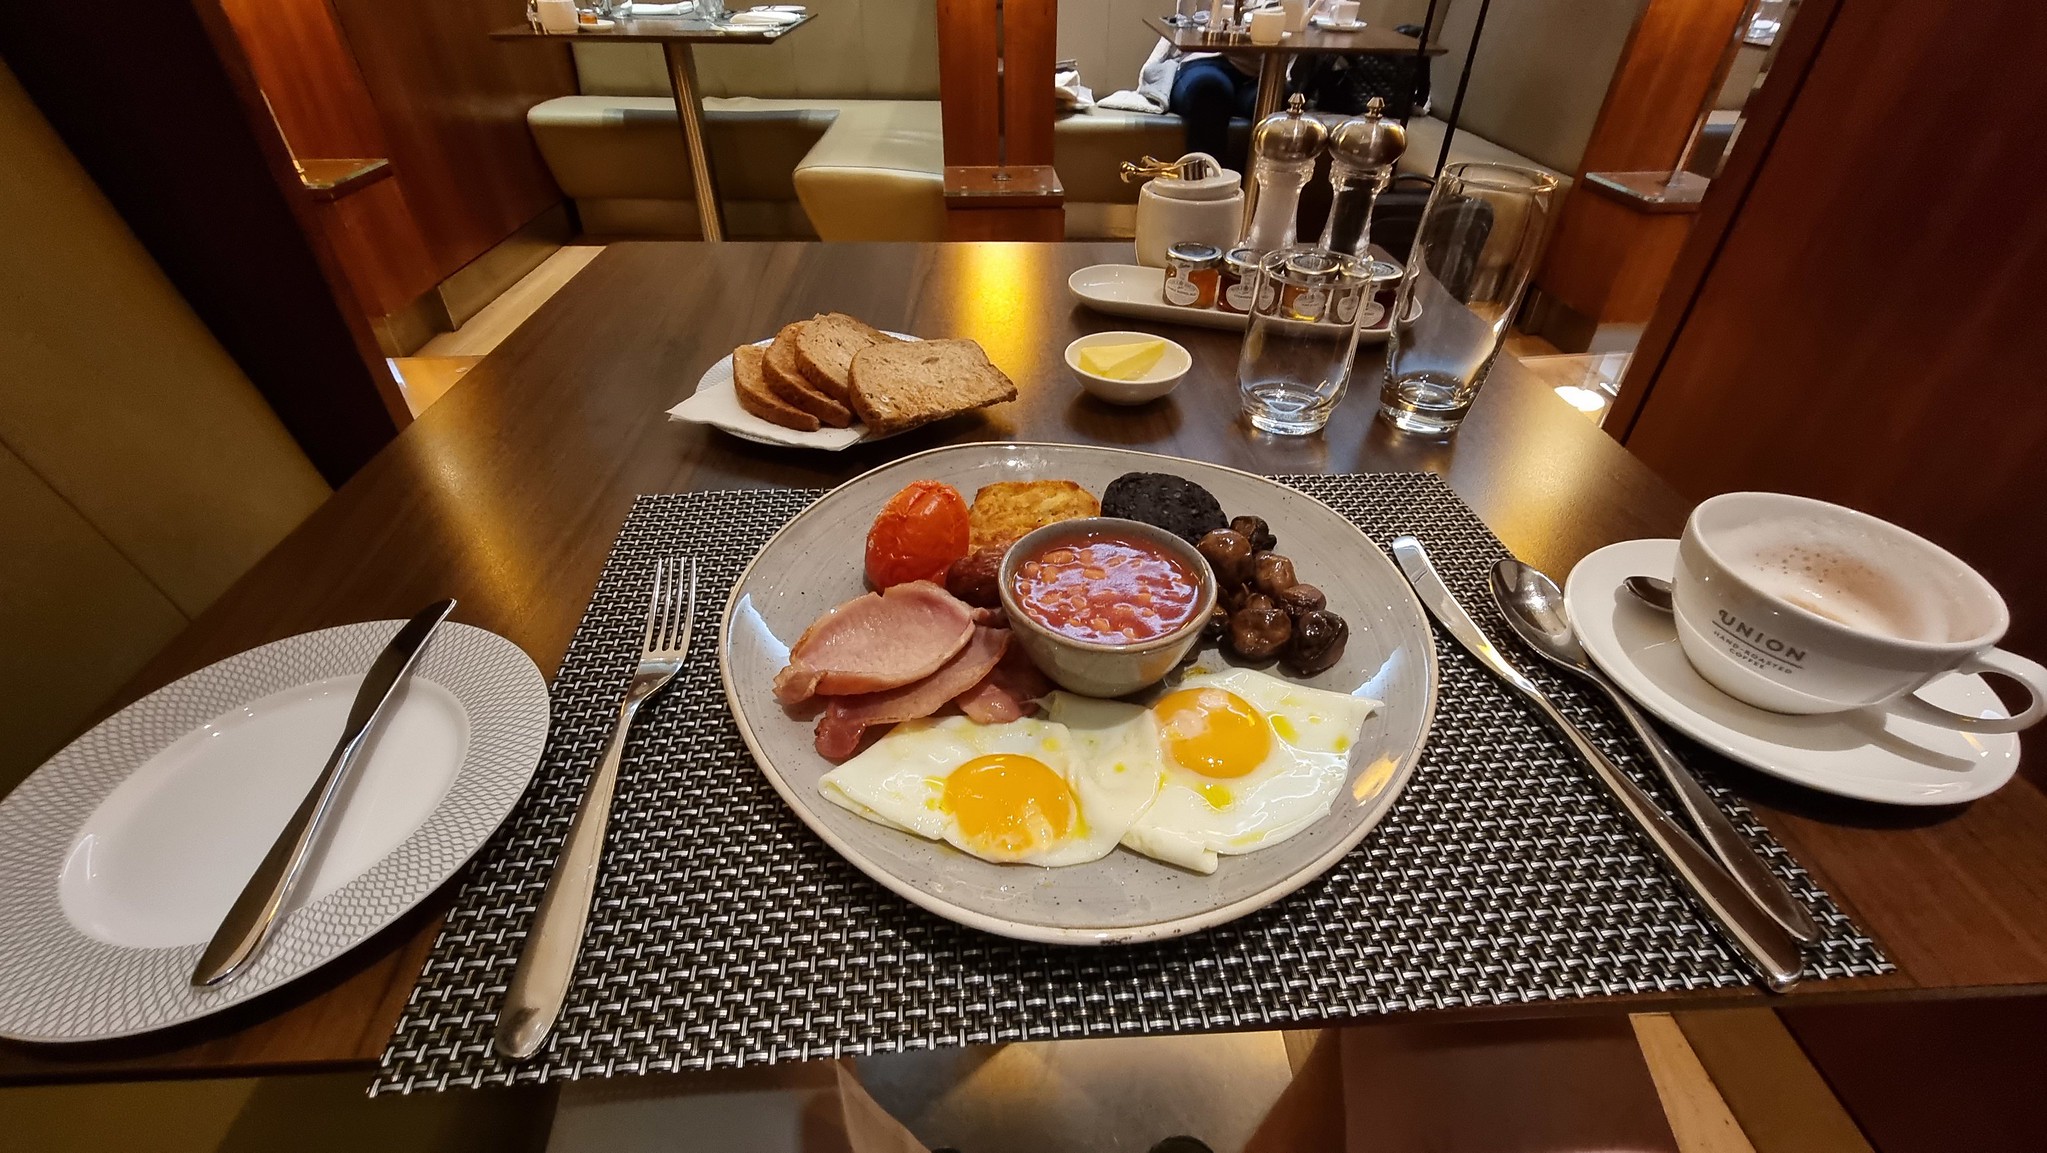 Another fab Big Breakfast in the BA CCR at Heathrow T5